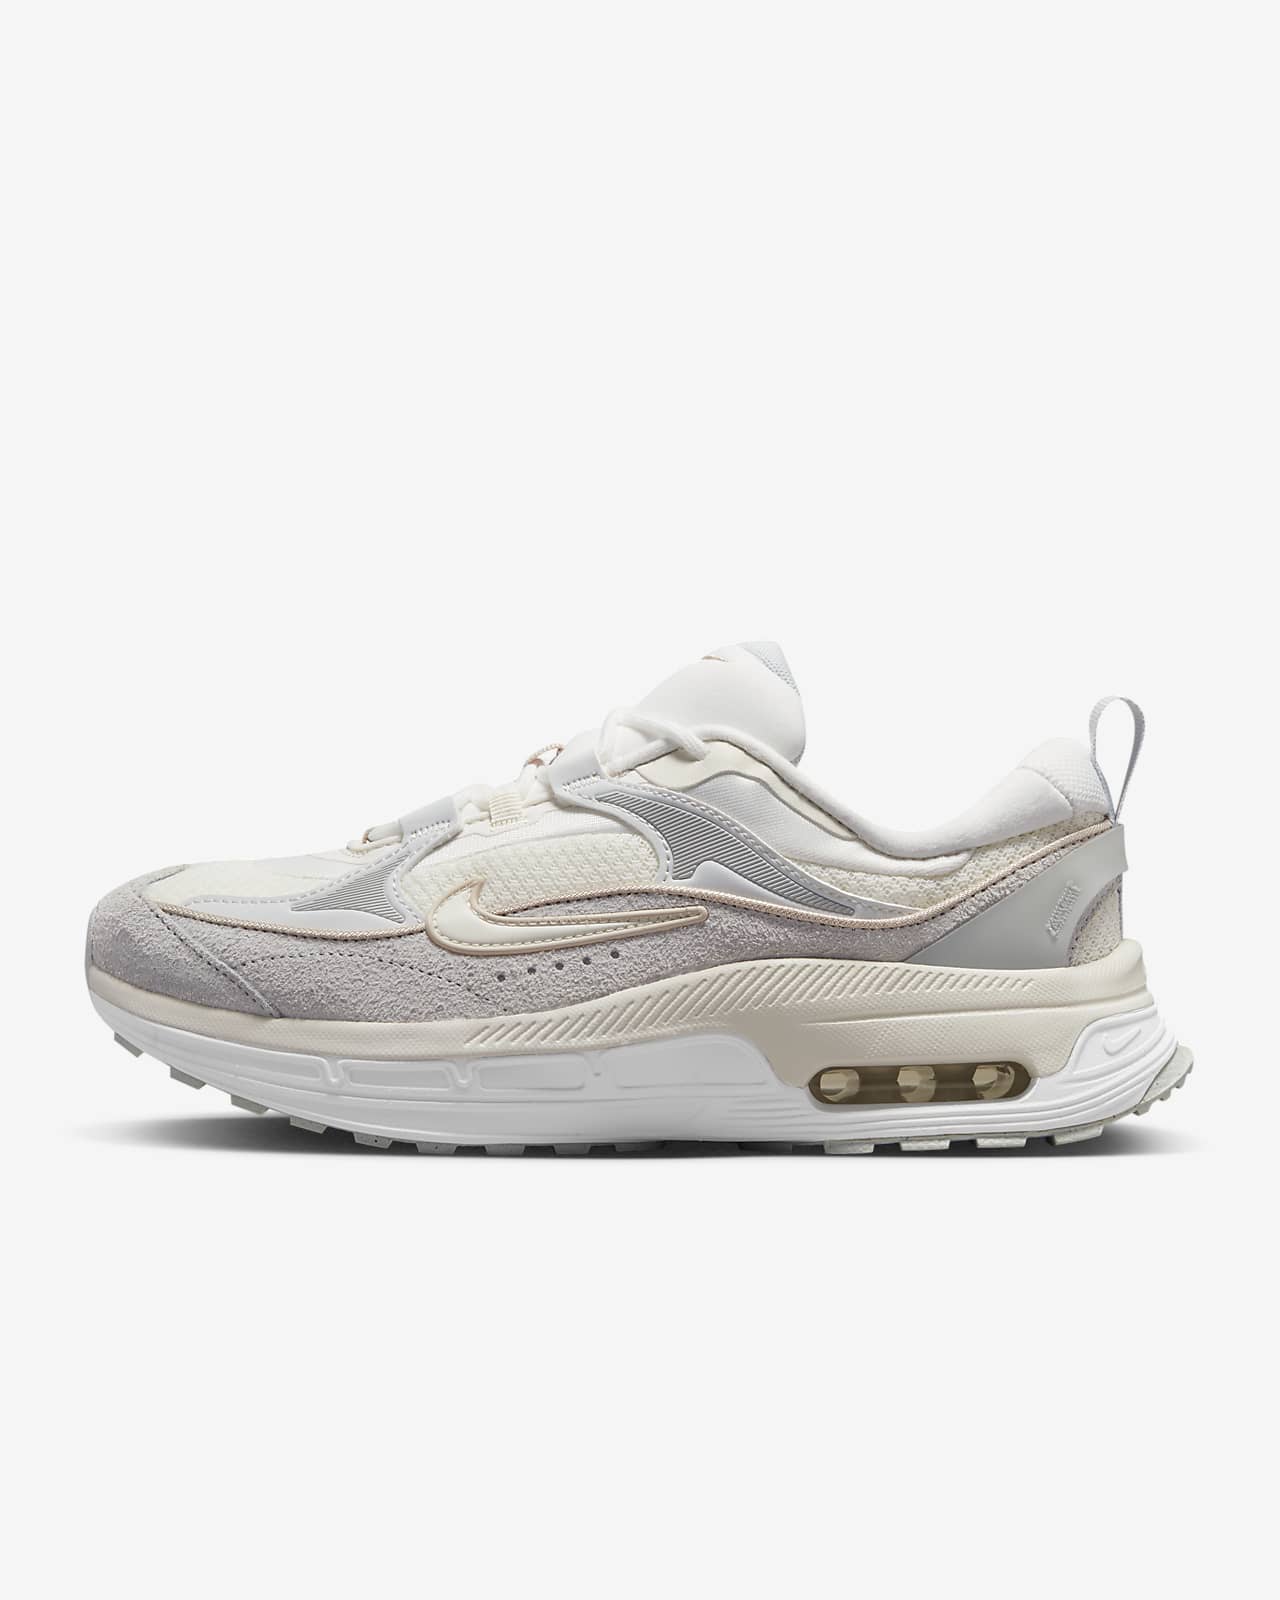 Nike Max Bliss LX Women's Shoes.